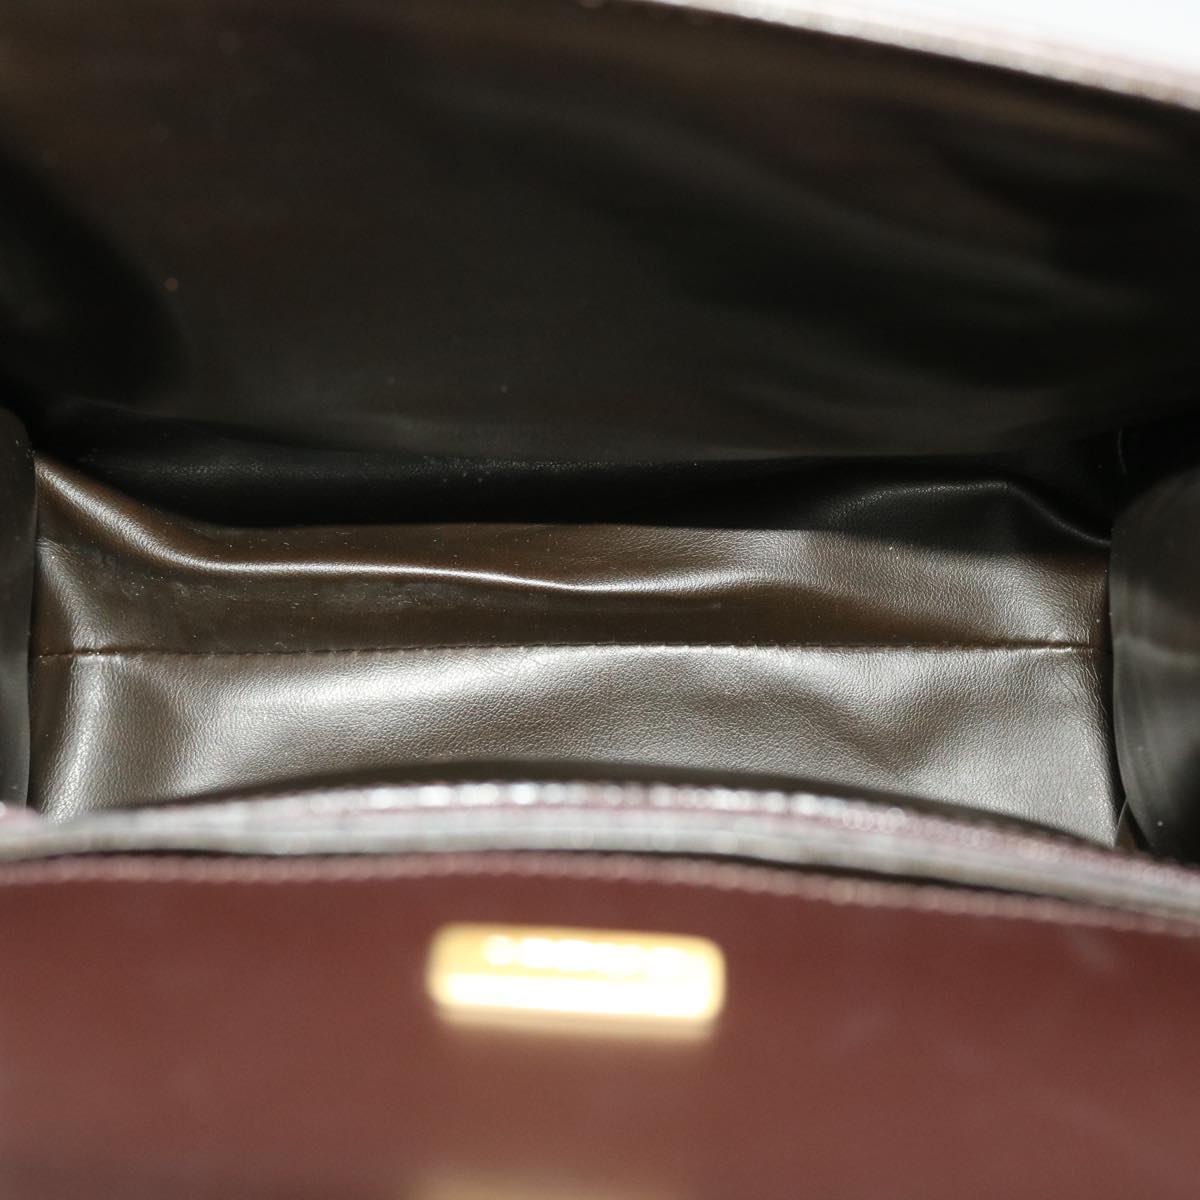 BALLY Shoulder Bag Leather Brown Auth bs5350